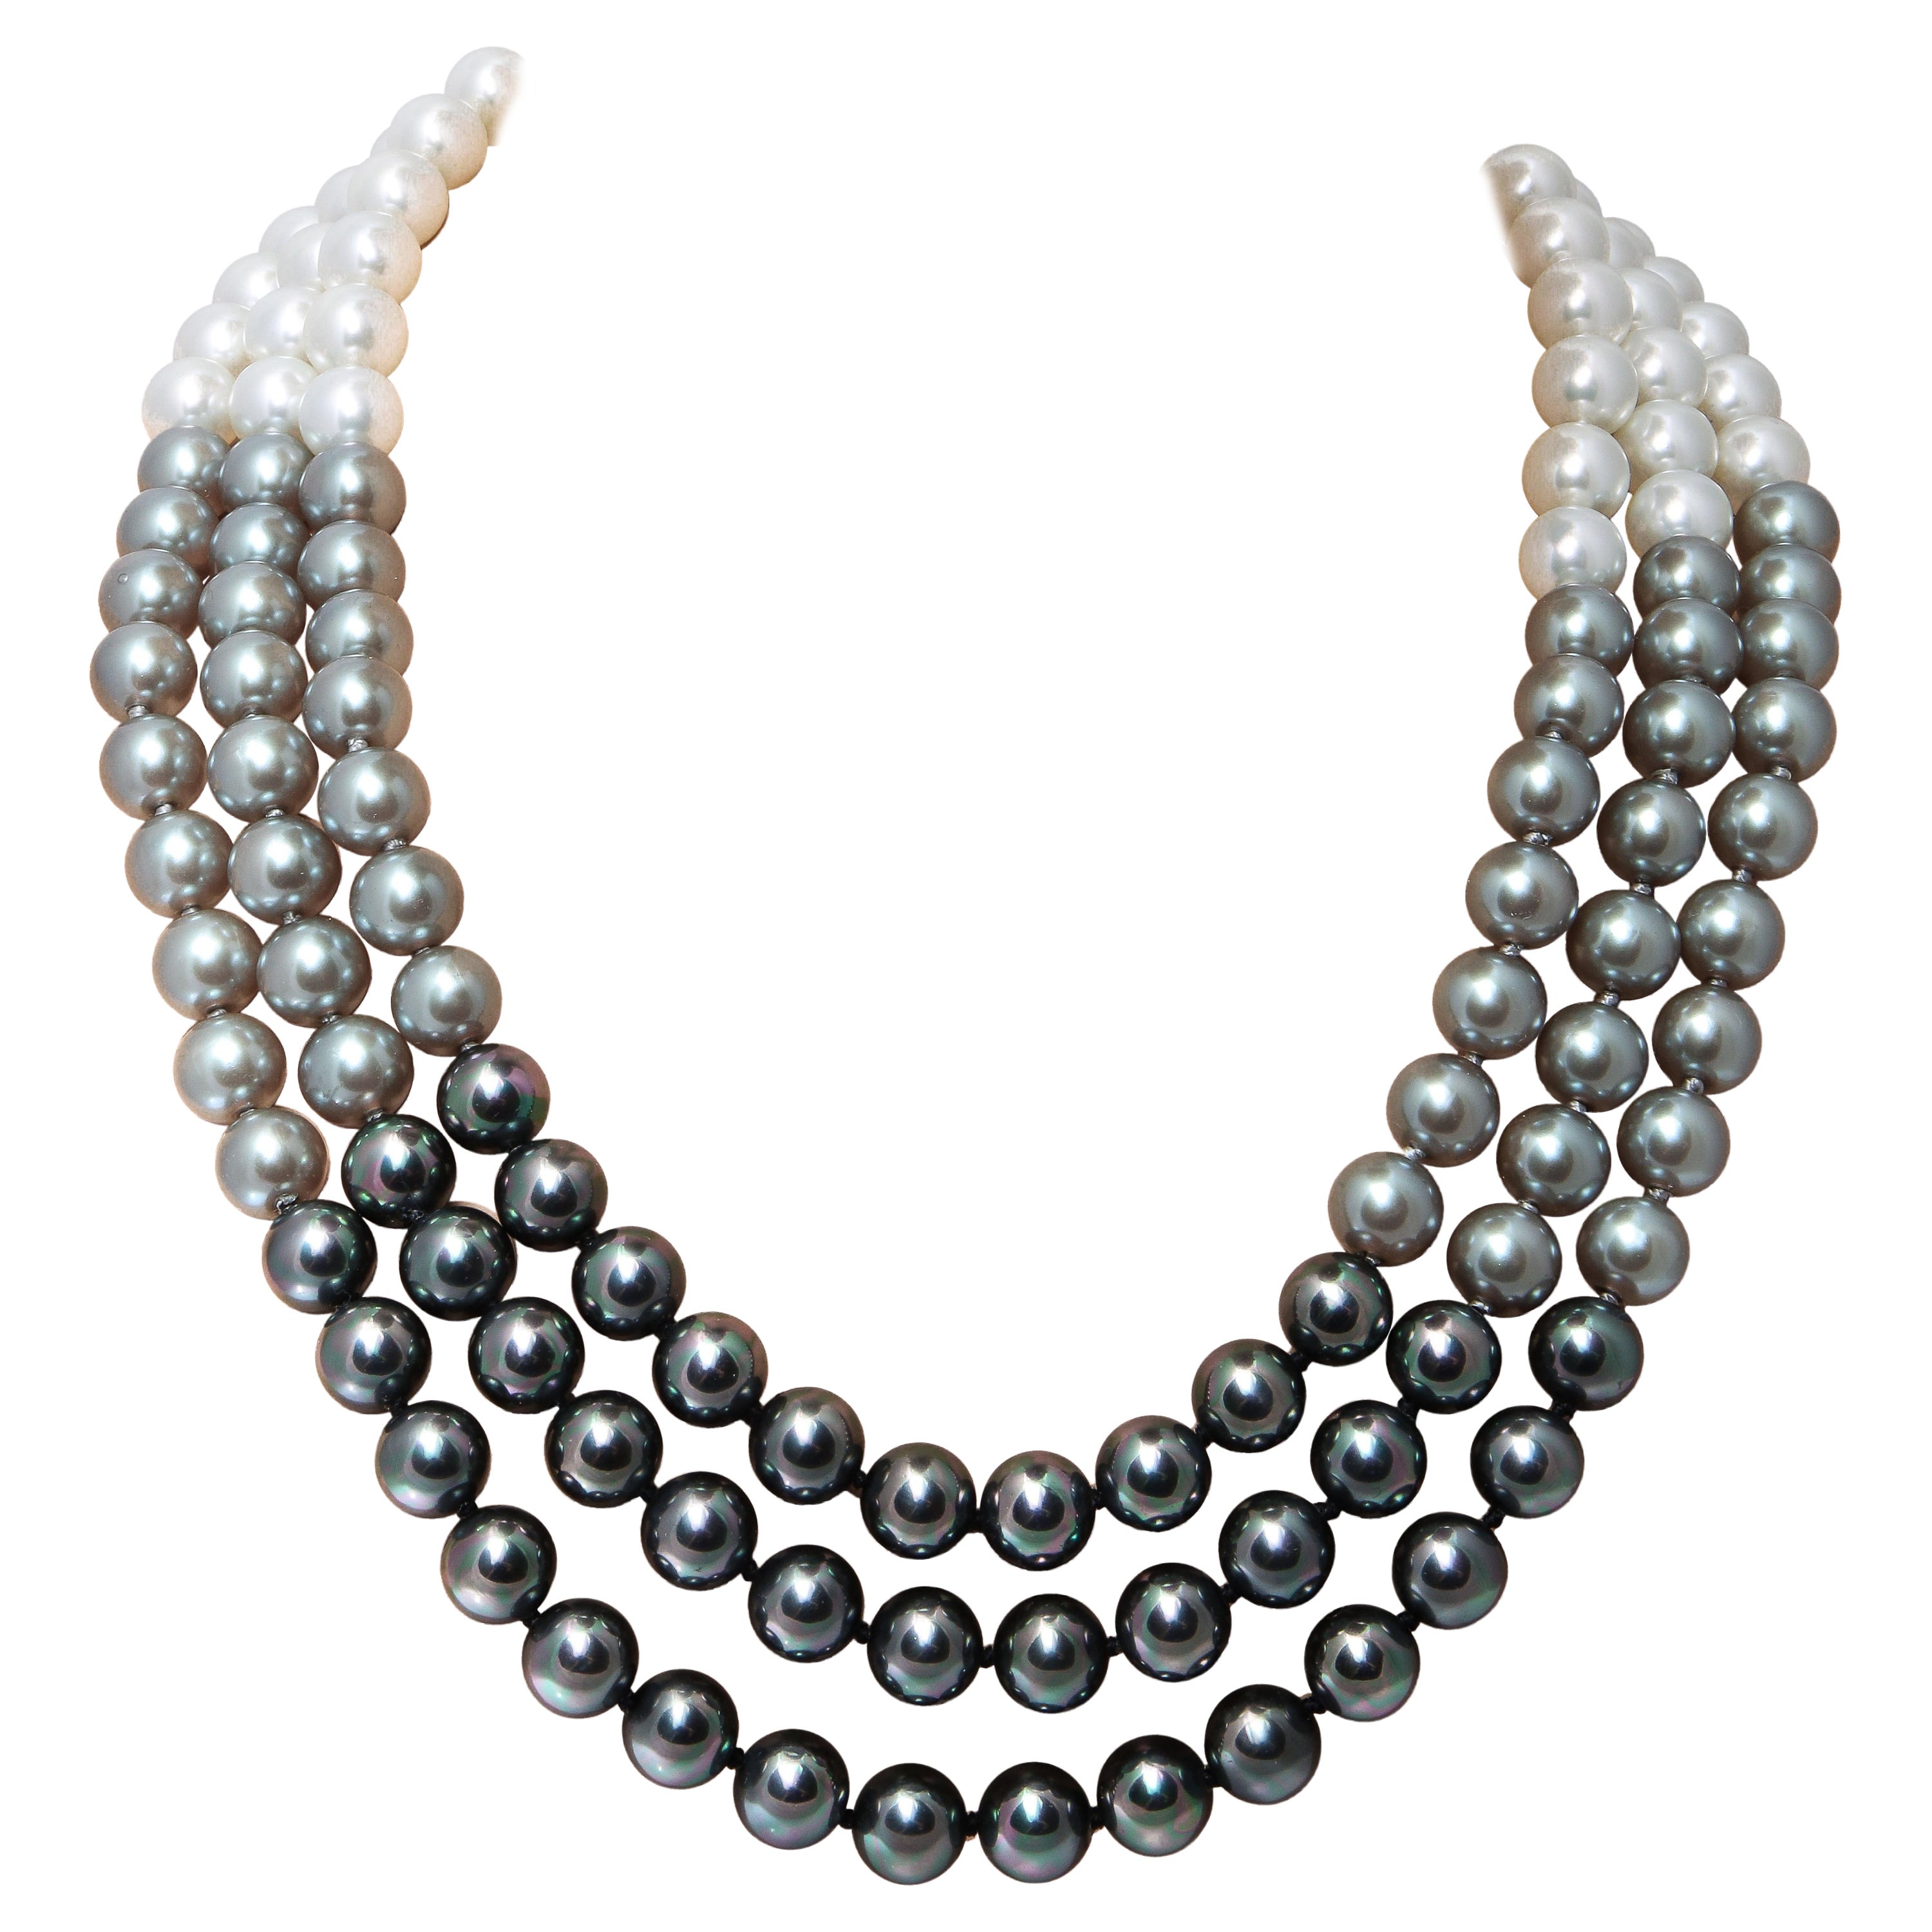  Shaded South Sea Manmade Pearls  Separable Three Necklaces Mikimoto Style